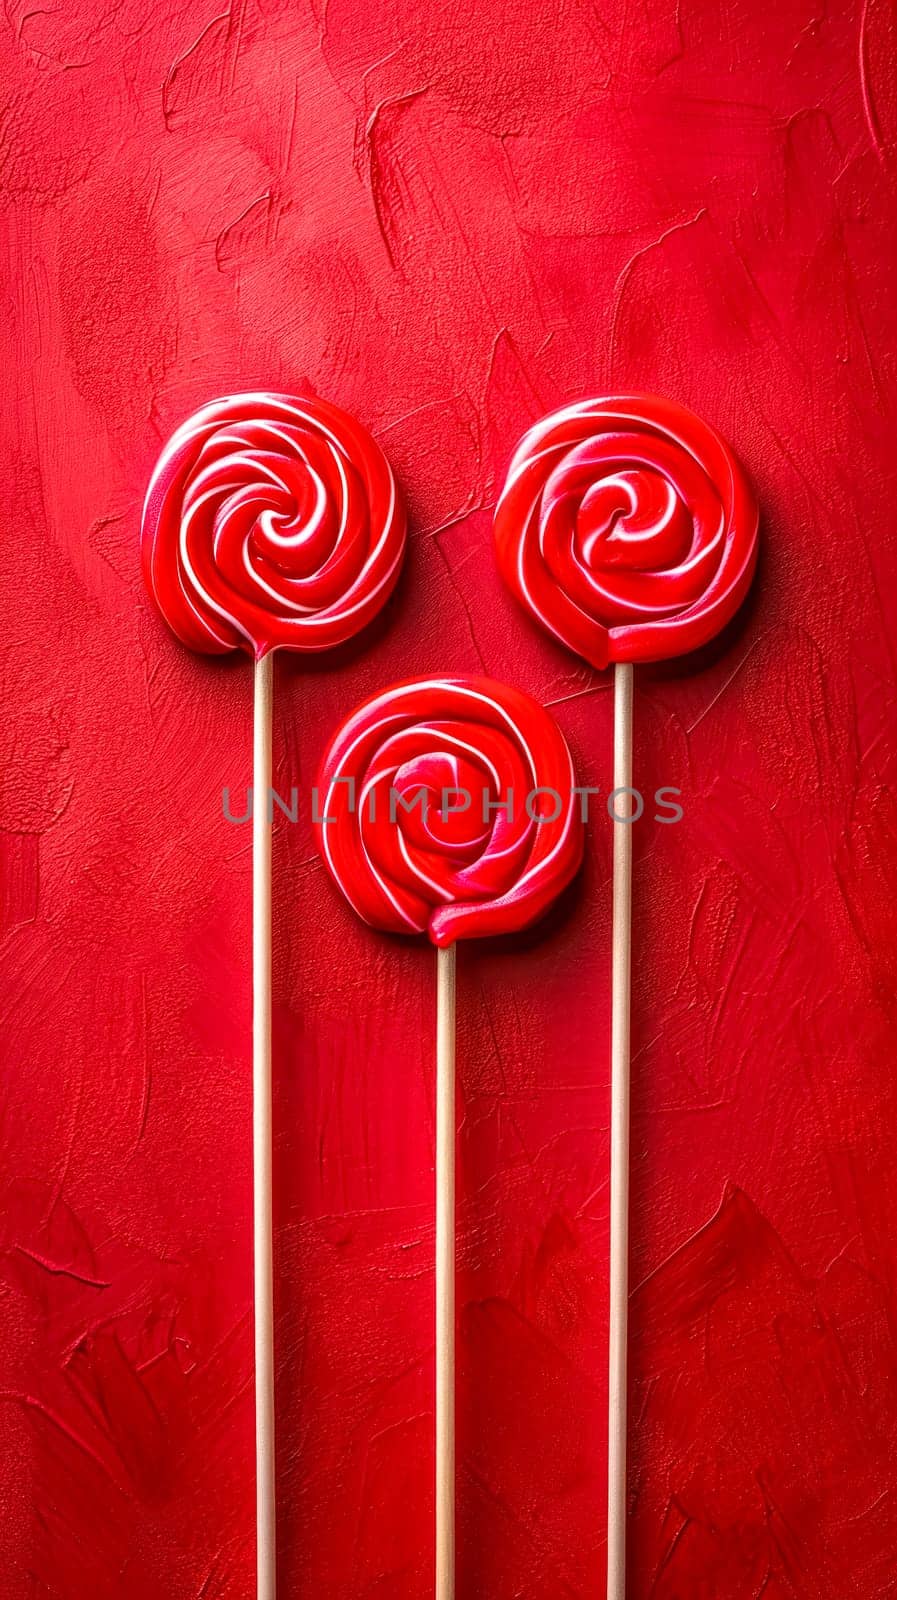 three red and white swirled lollipops on sticks aligned vertically against a textured red background by Edophoto